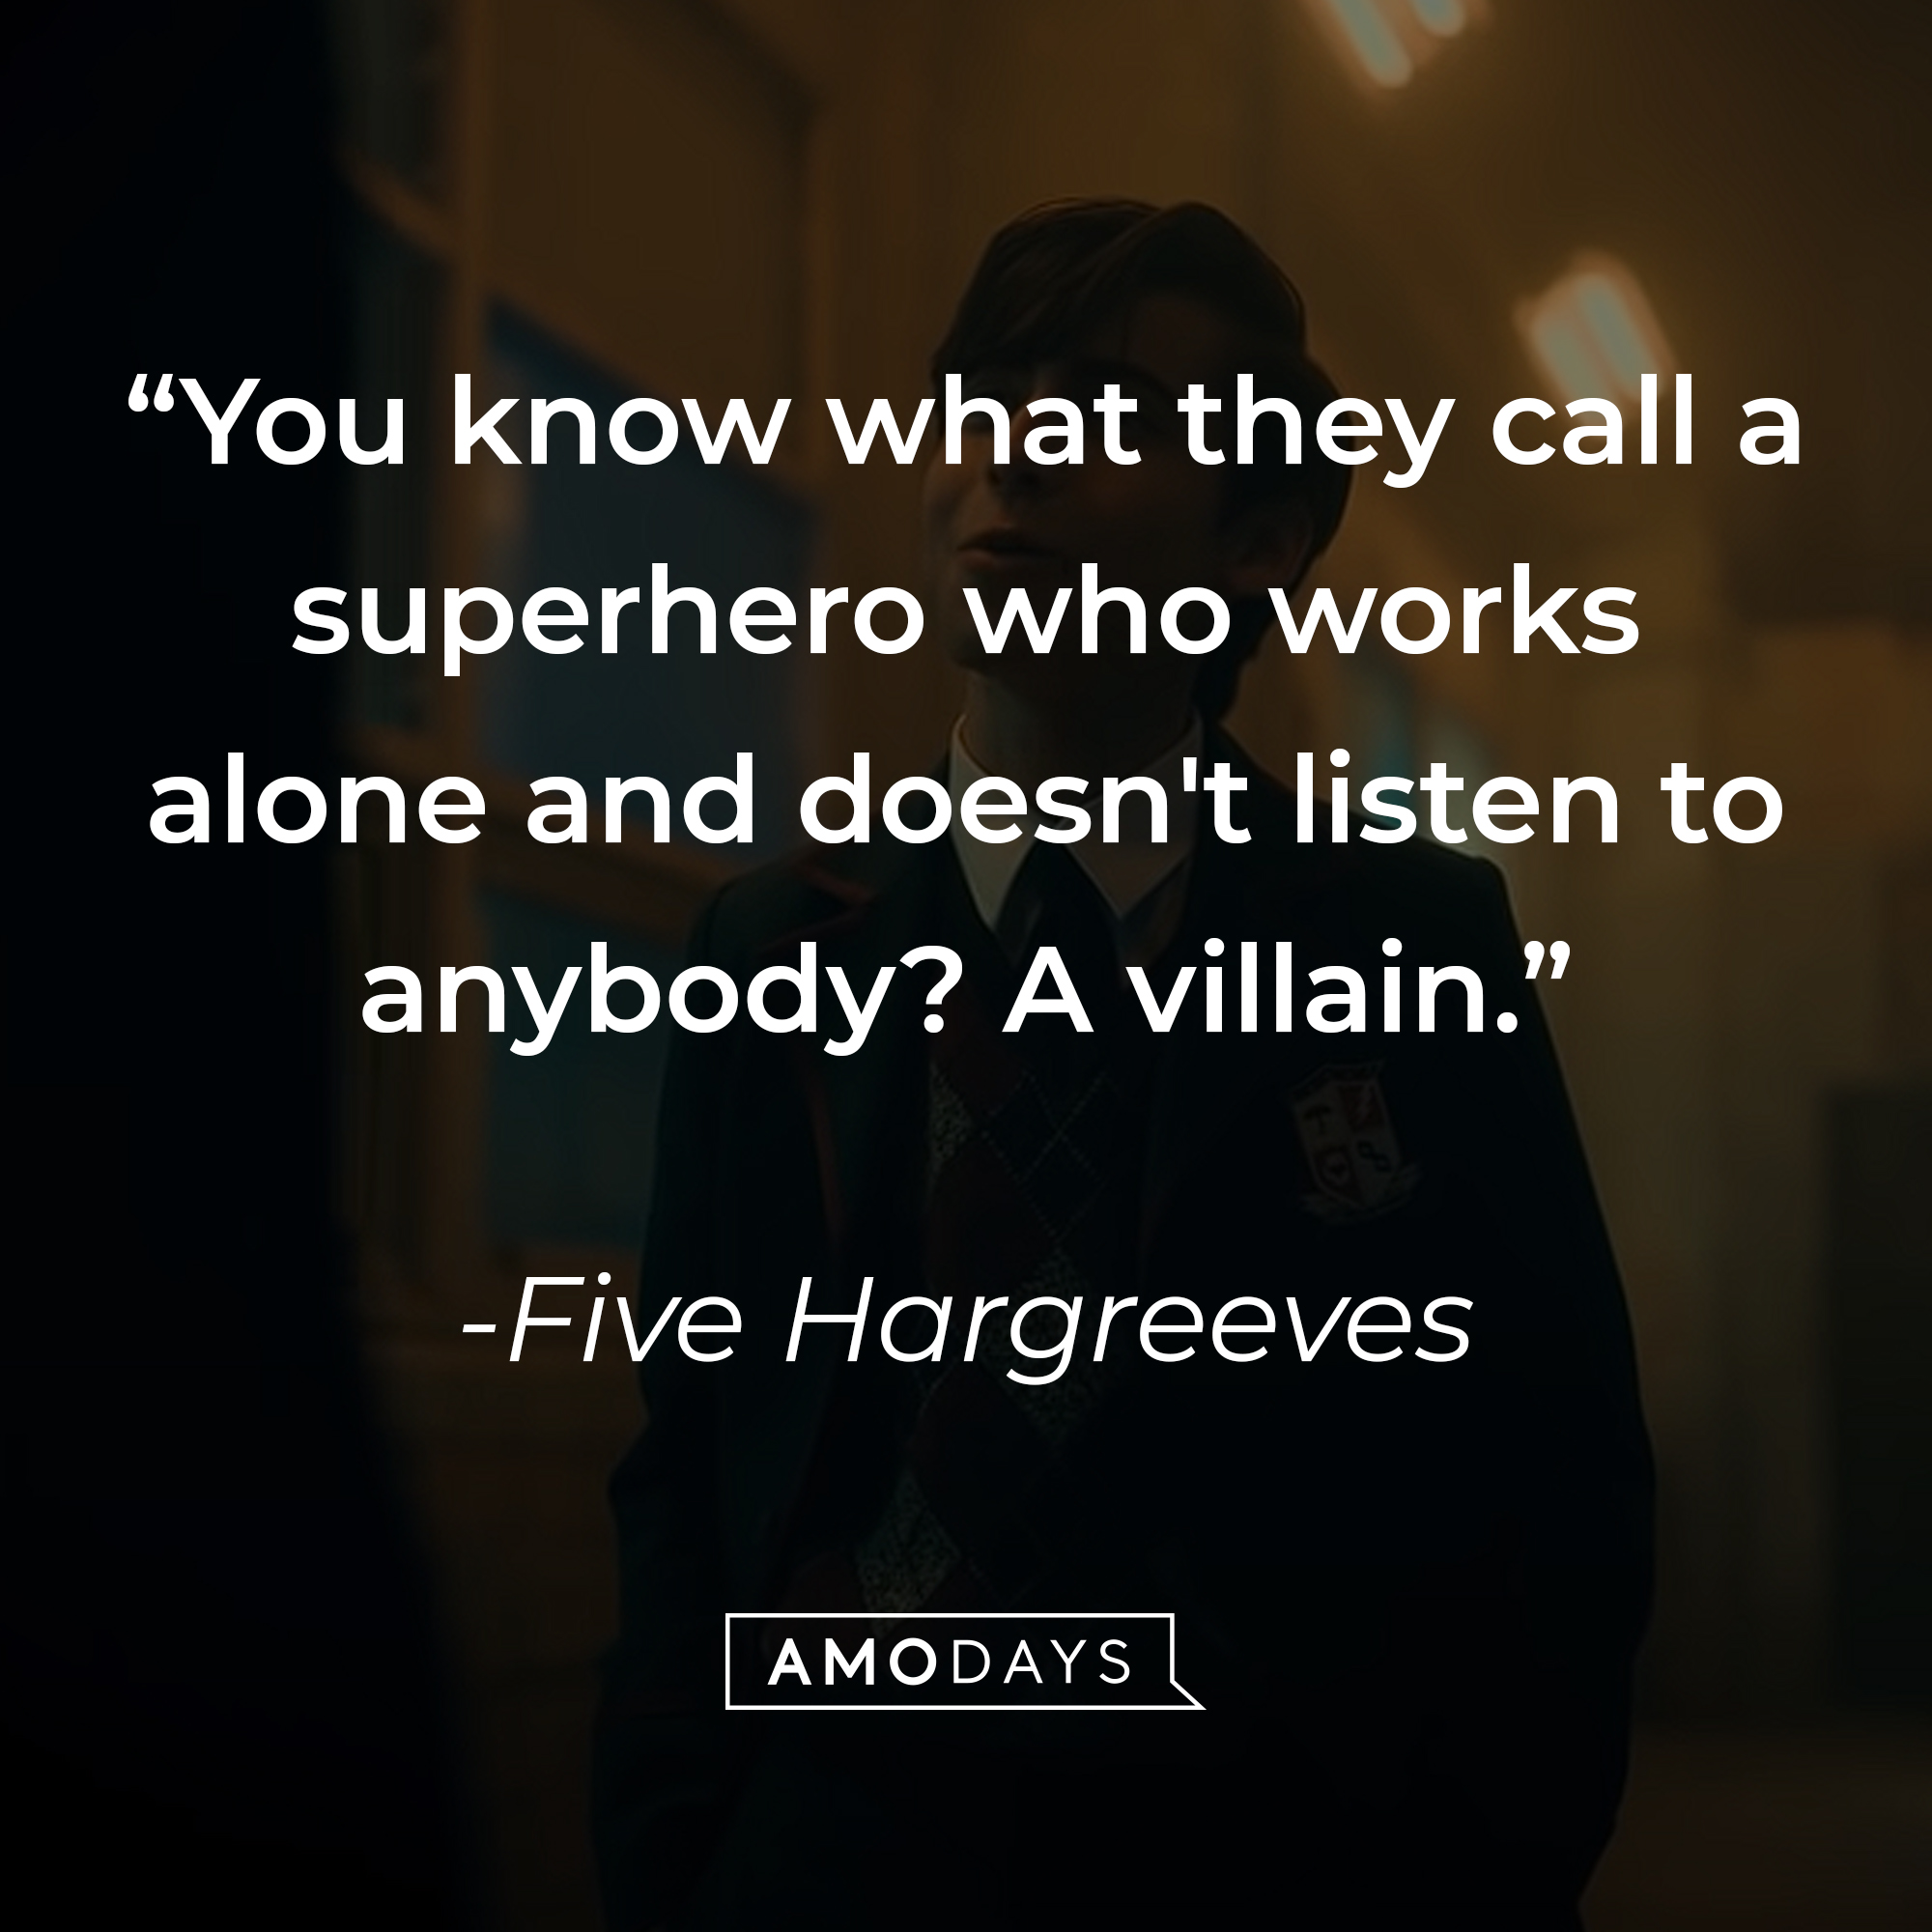 Five Hargreeves’ quote: “You know what they call a superhero who works alone and doesn't listen to anybody? A villain.” | Source: youtube.com/Netflix